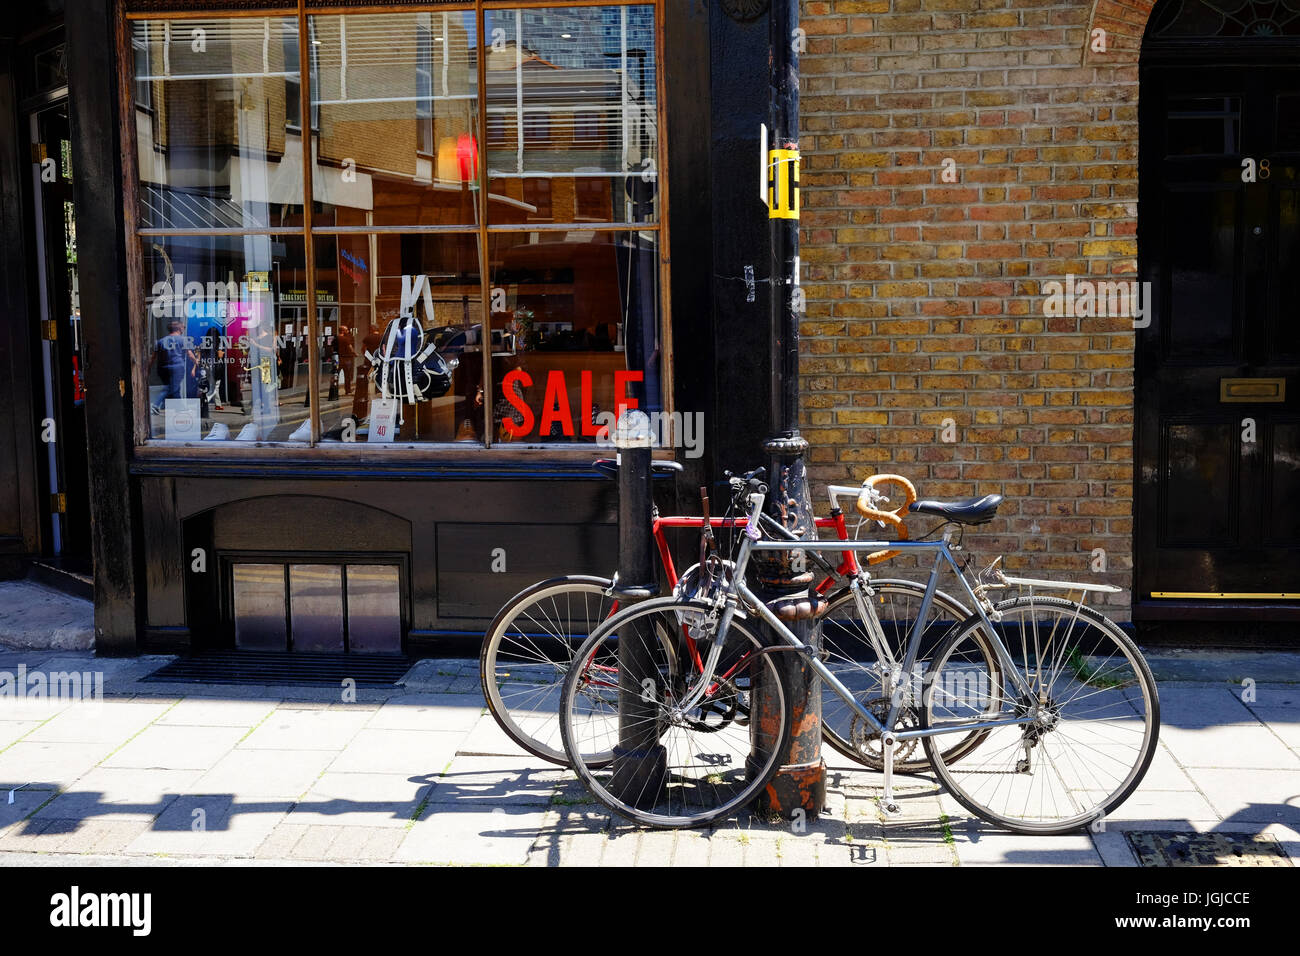 Bikes parked outside a shop in Wilkes Street in Shoreditch, in the East End of London.  The shop has a sale on. Stock Photo